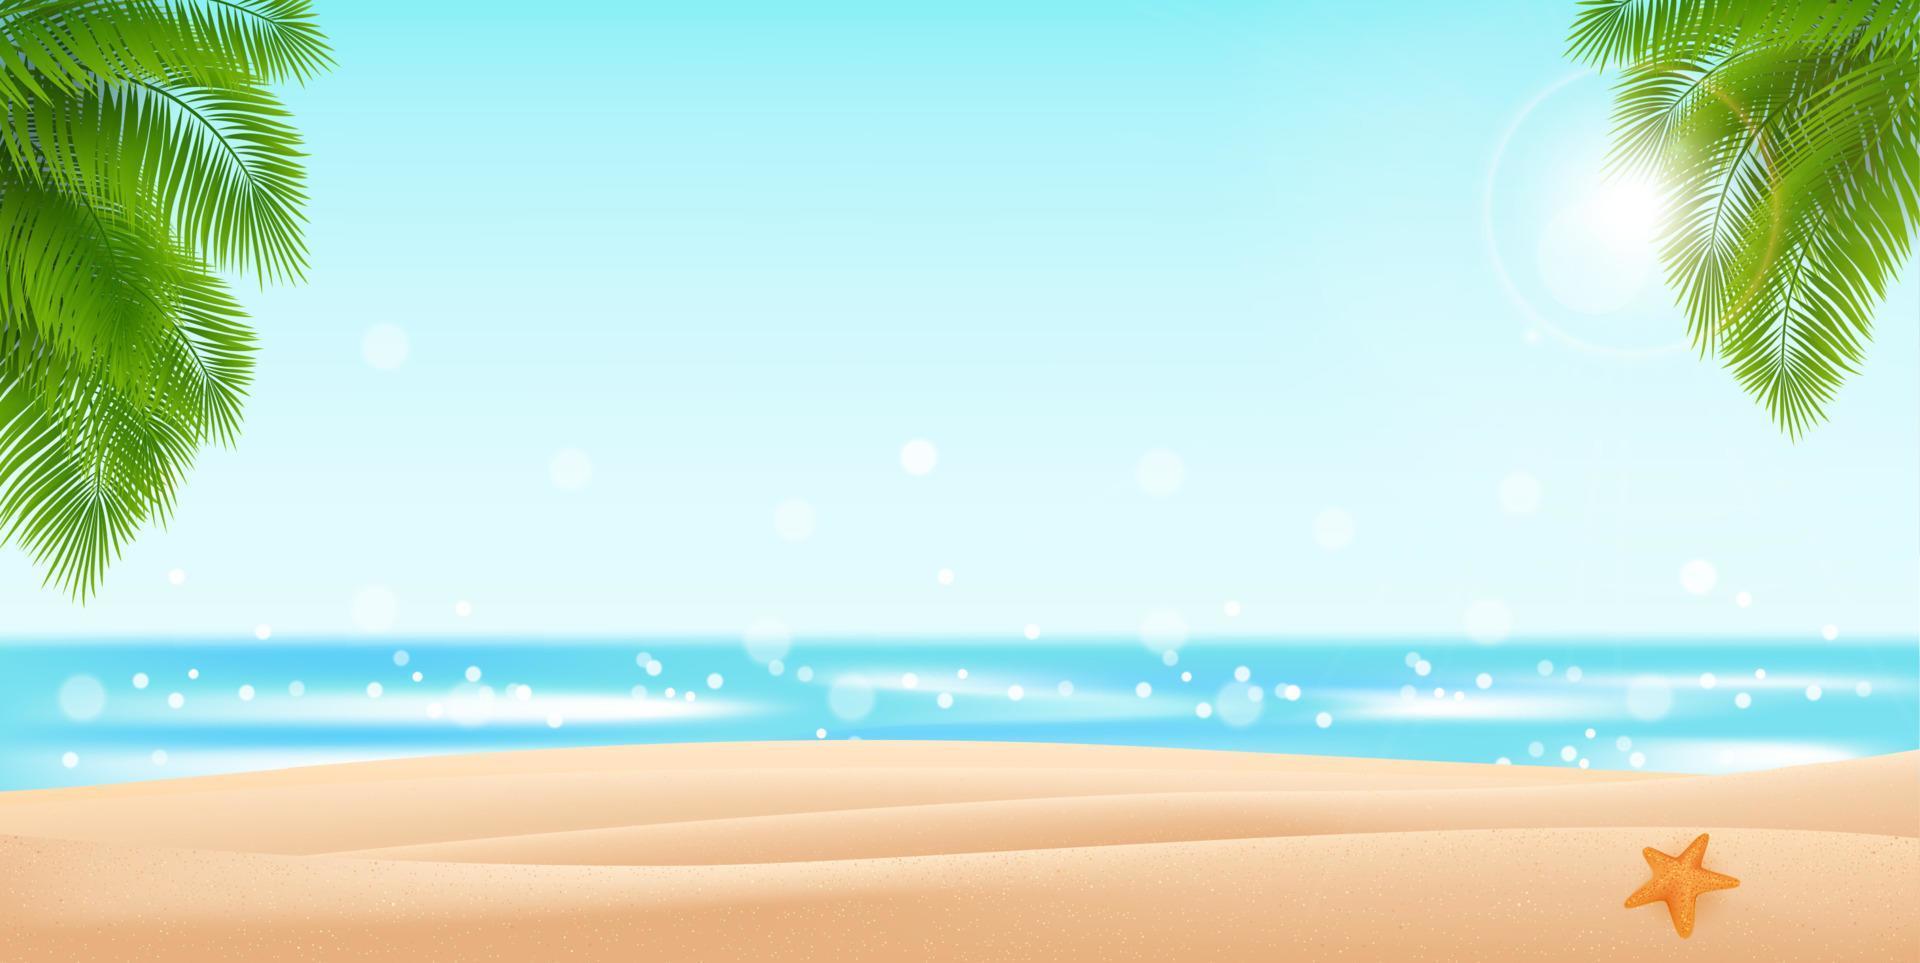 Sea panorama, Tropical beach vector background. Palm leaves sand and sea vector illustration for your design.